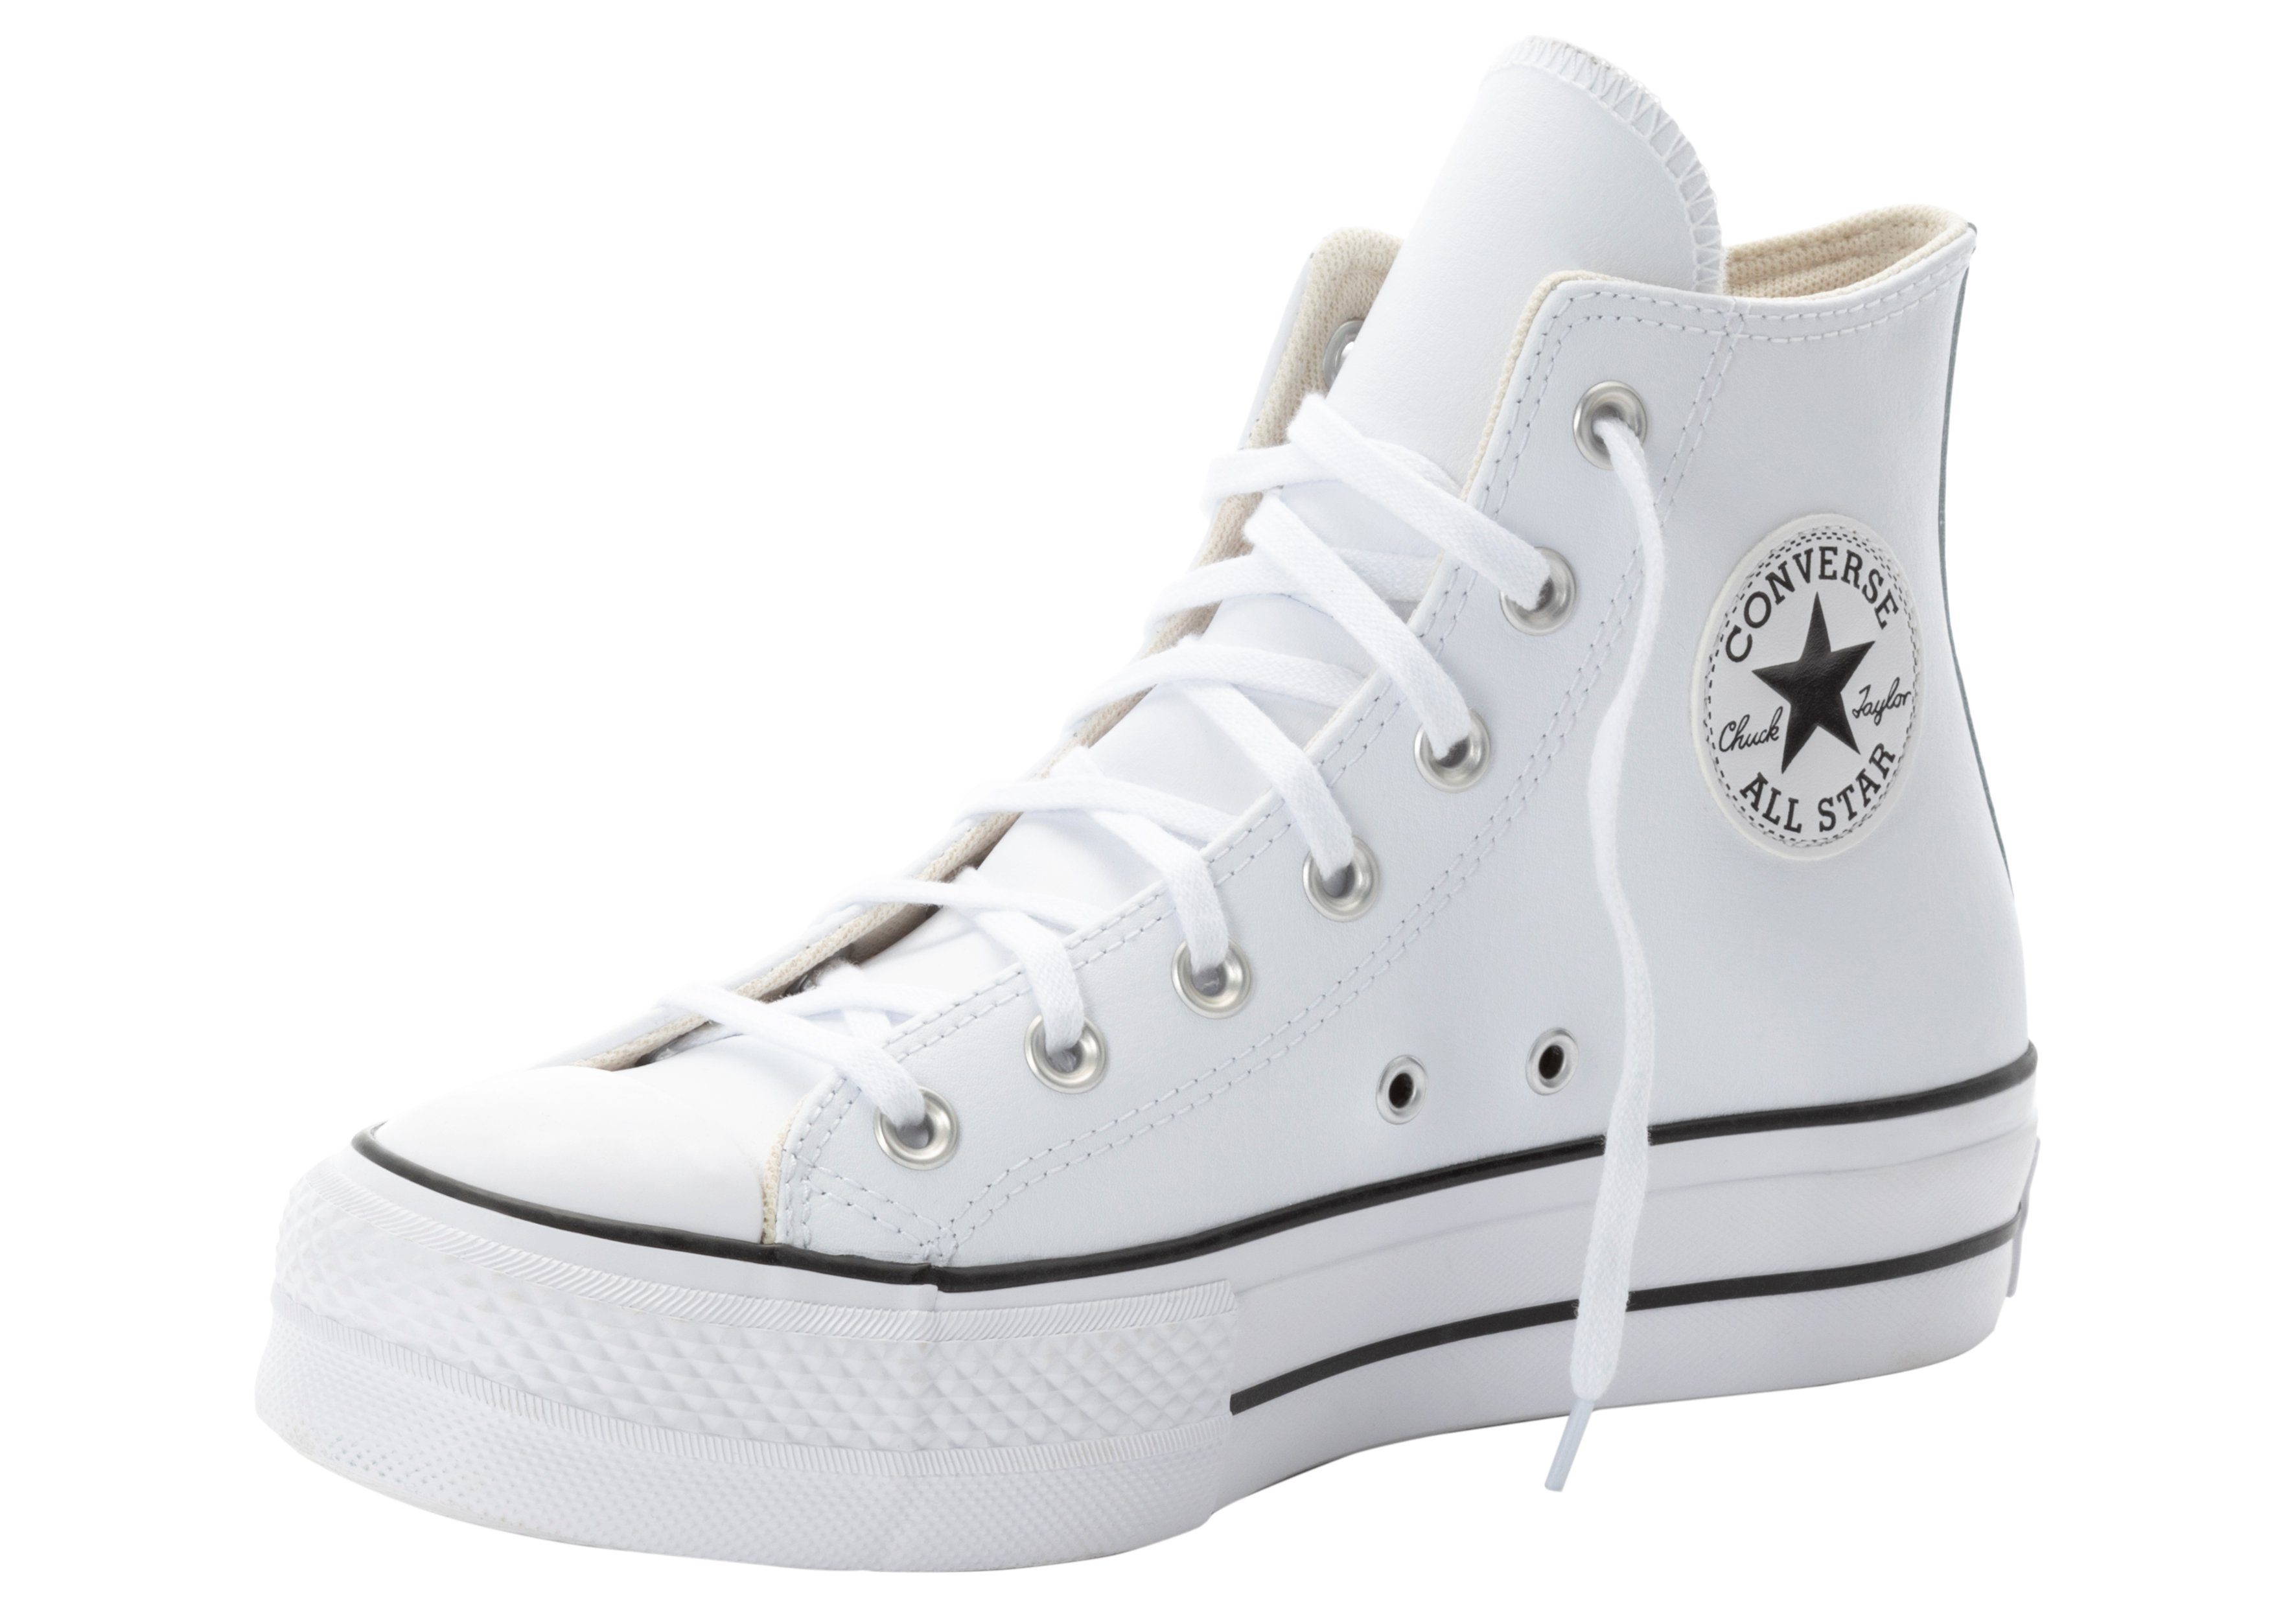 LEATHER ALL PLATFORM Converse TAYLOR Sneaker CHUCK STAR